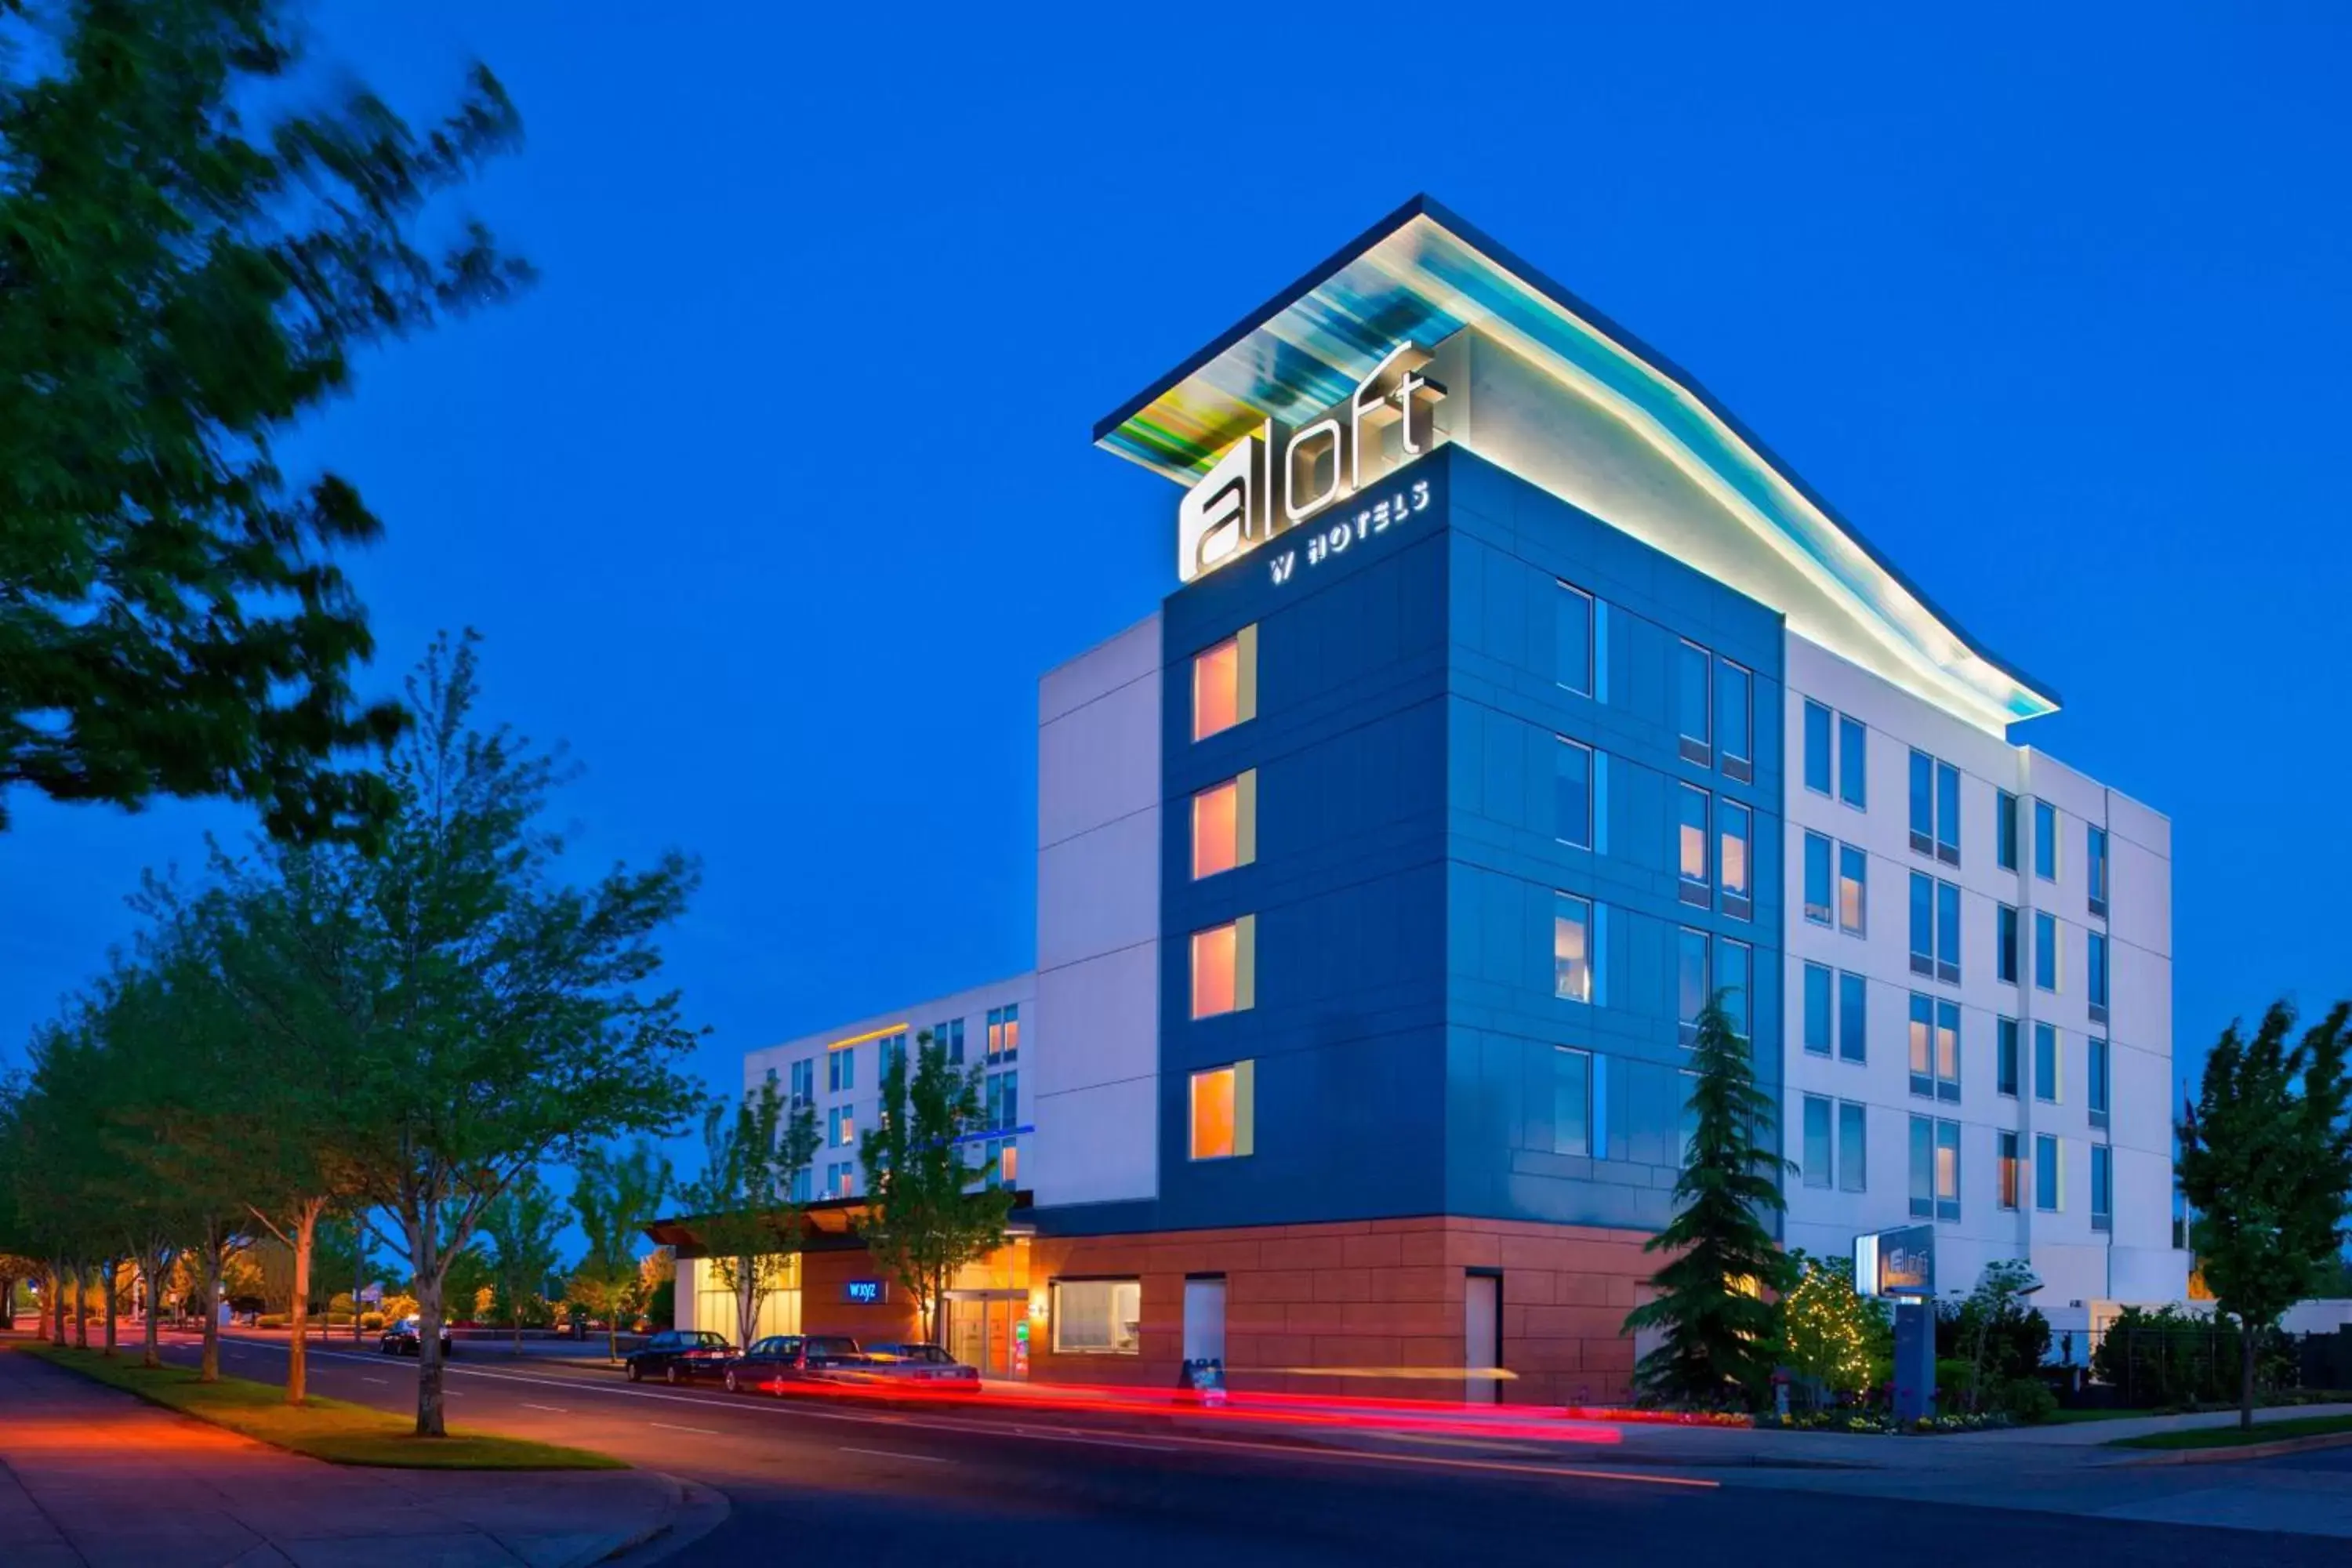 Property Building in Aloft Portland Airport Hotel at Cascade Station